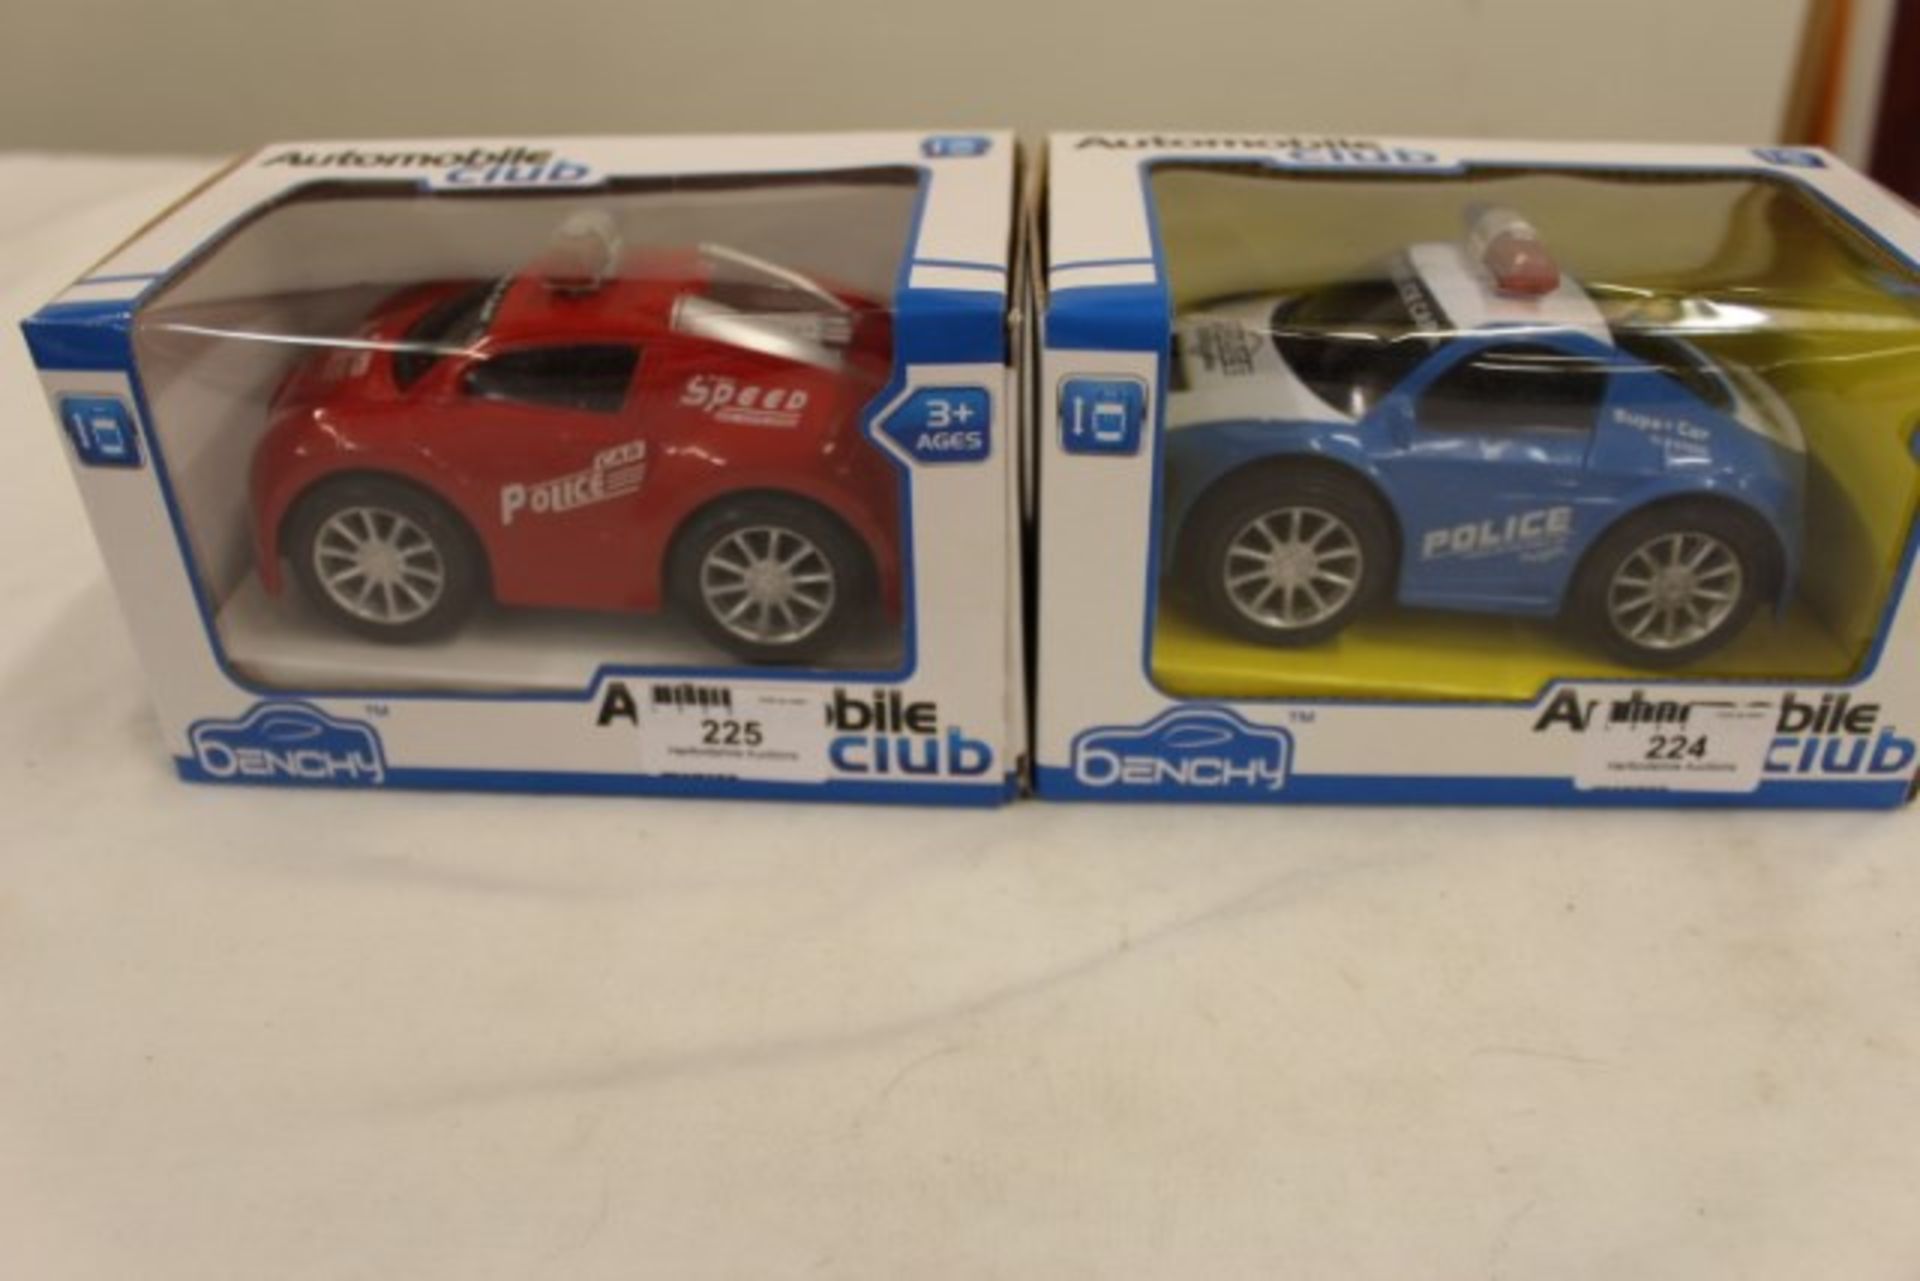 V Brand New Automobile Club Friction Police Car X 2 YOUR BID PRICE TO BE MULTIPLIED BY TWO